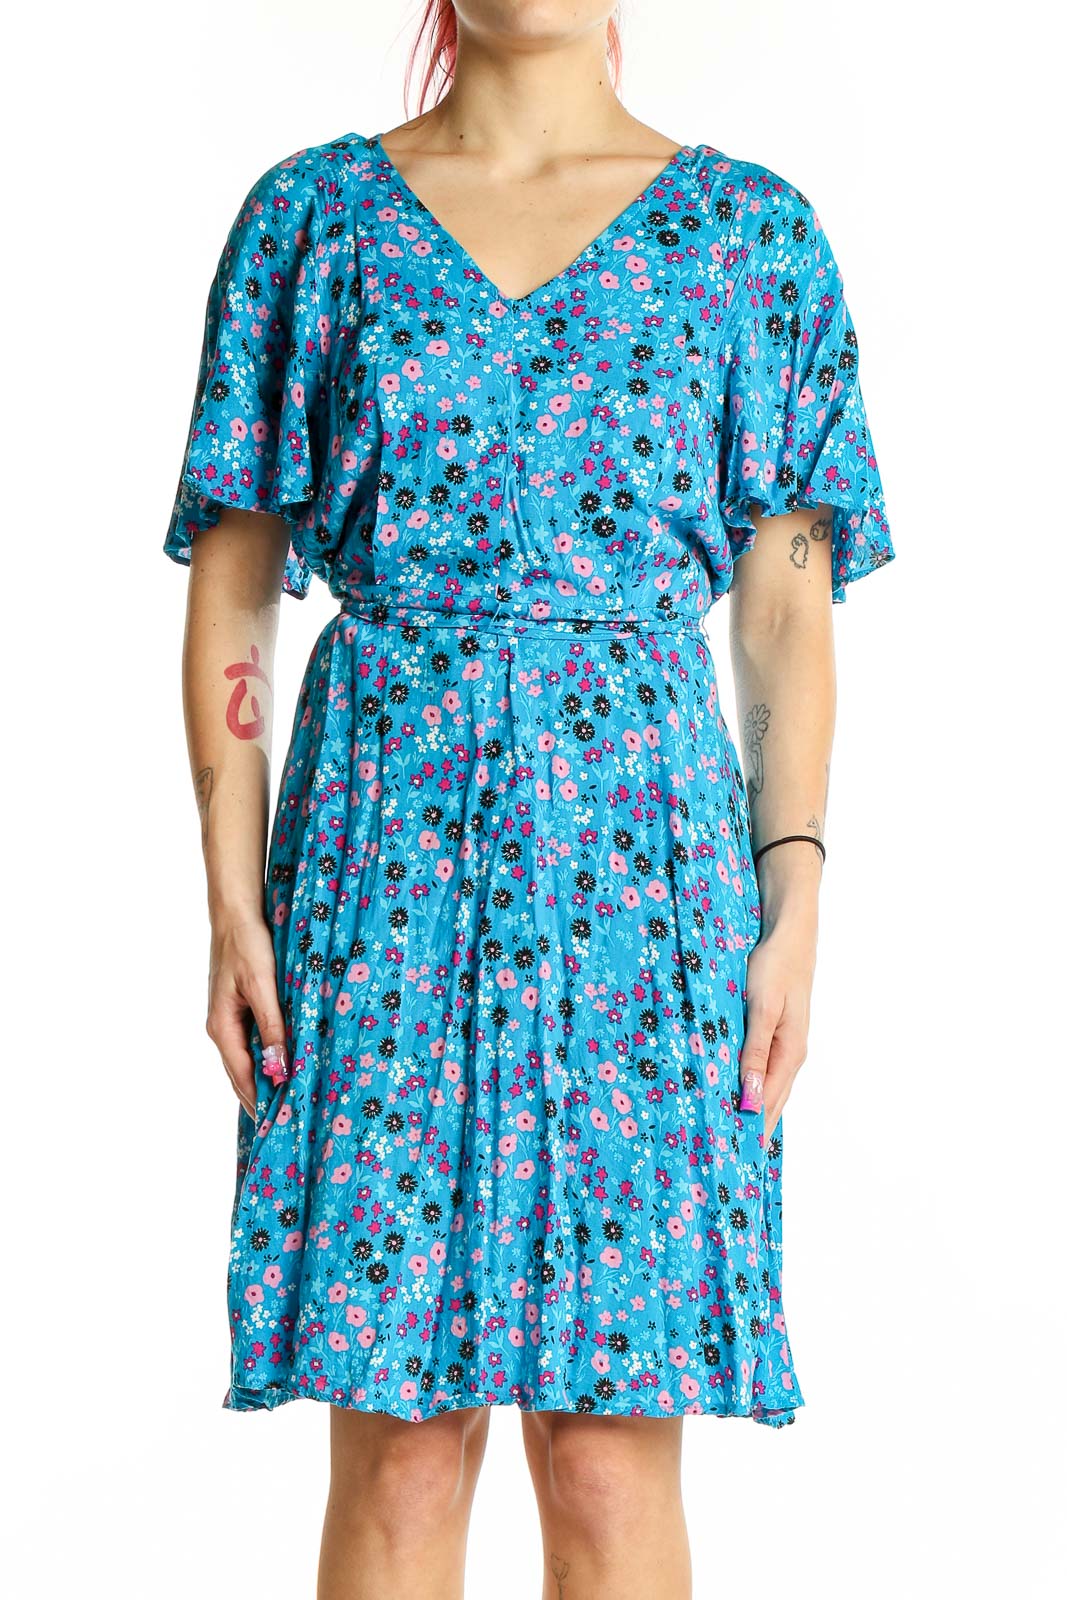 Blue All Day Wear Bohemian Floral Dress Front